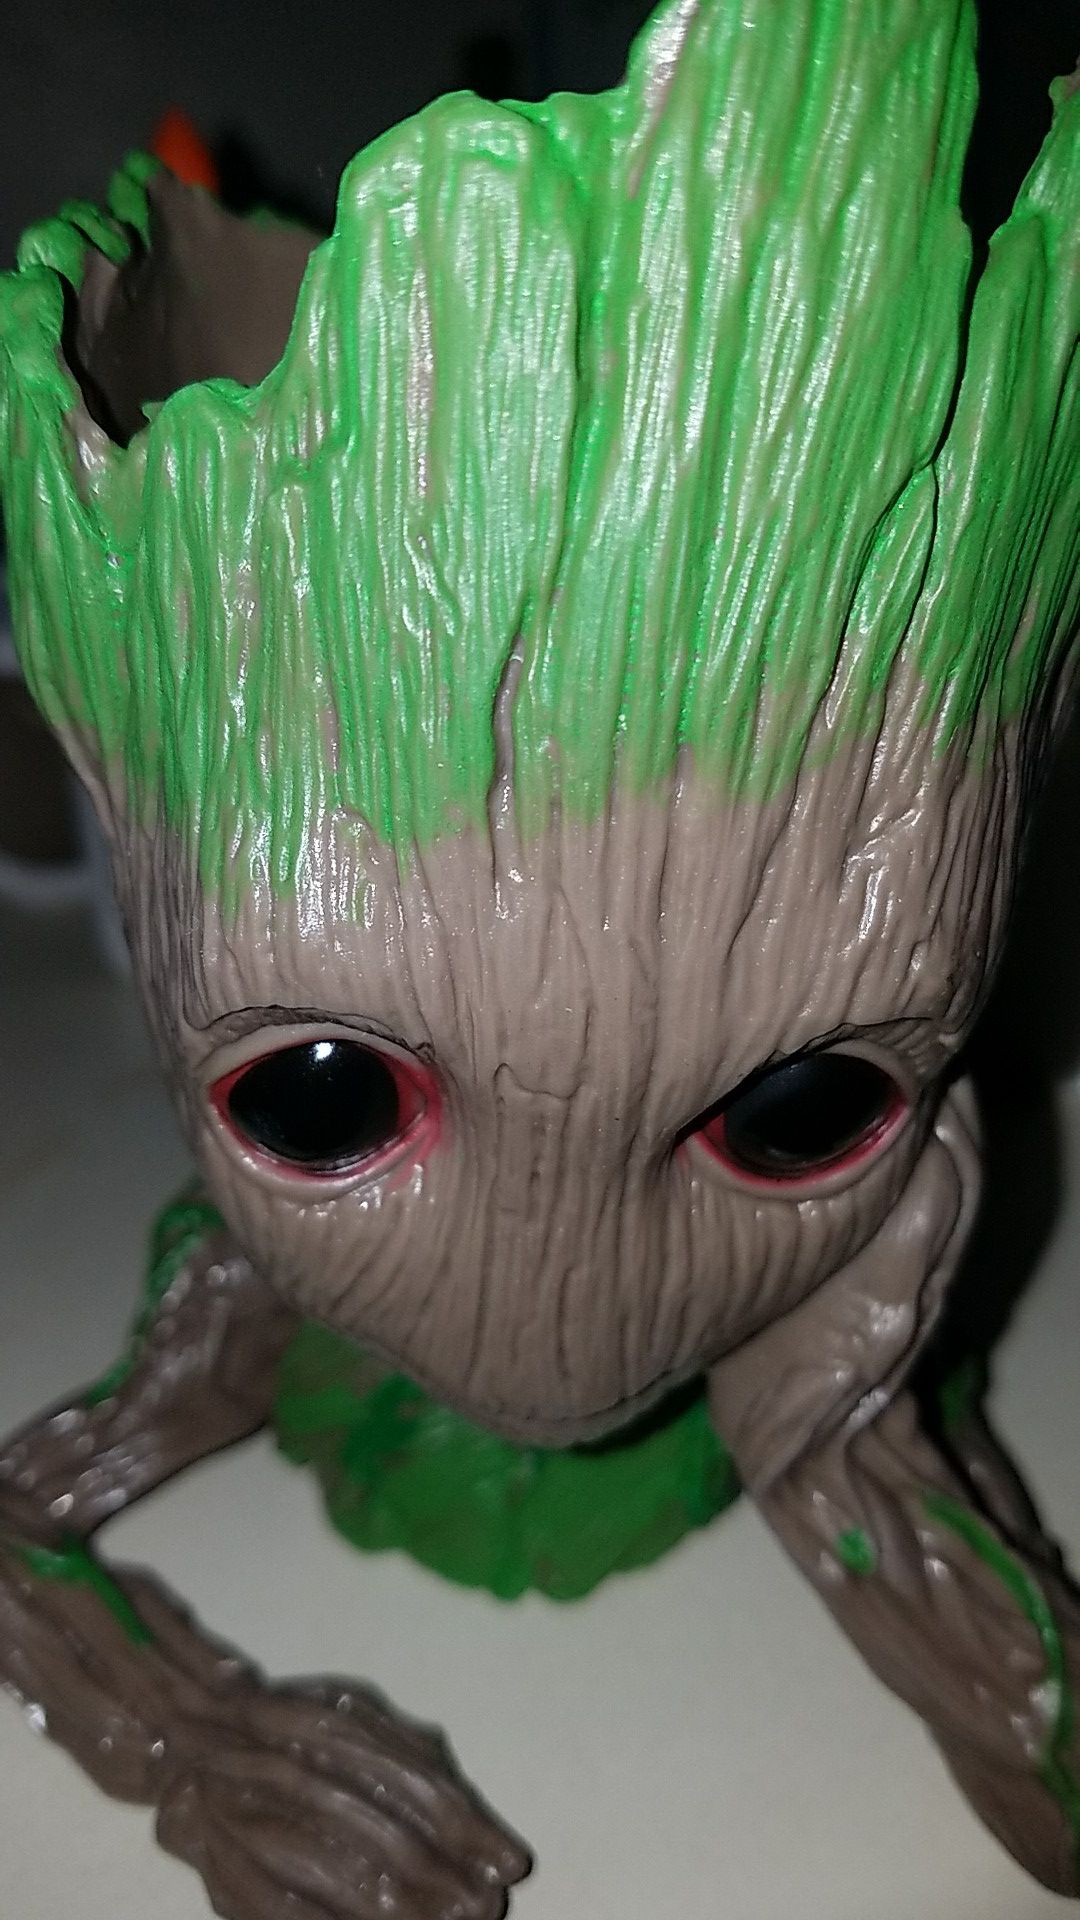 Groot planter with hand on face